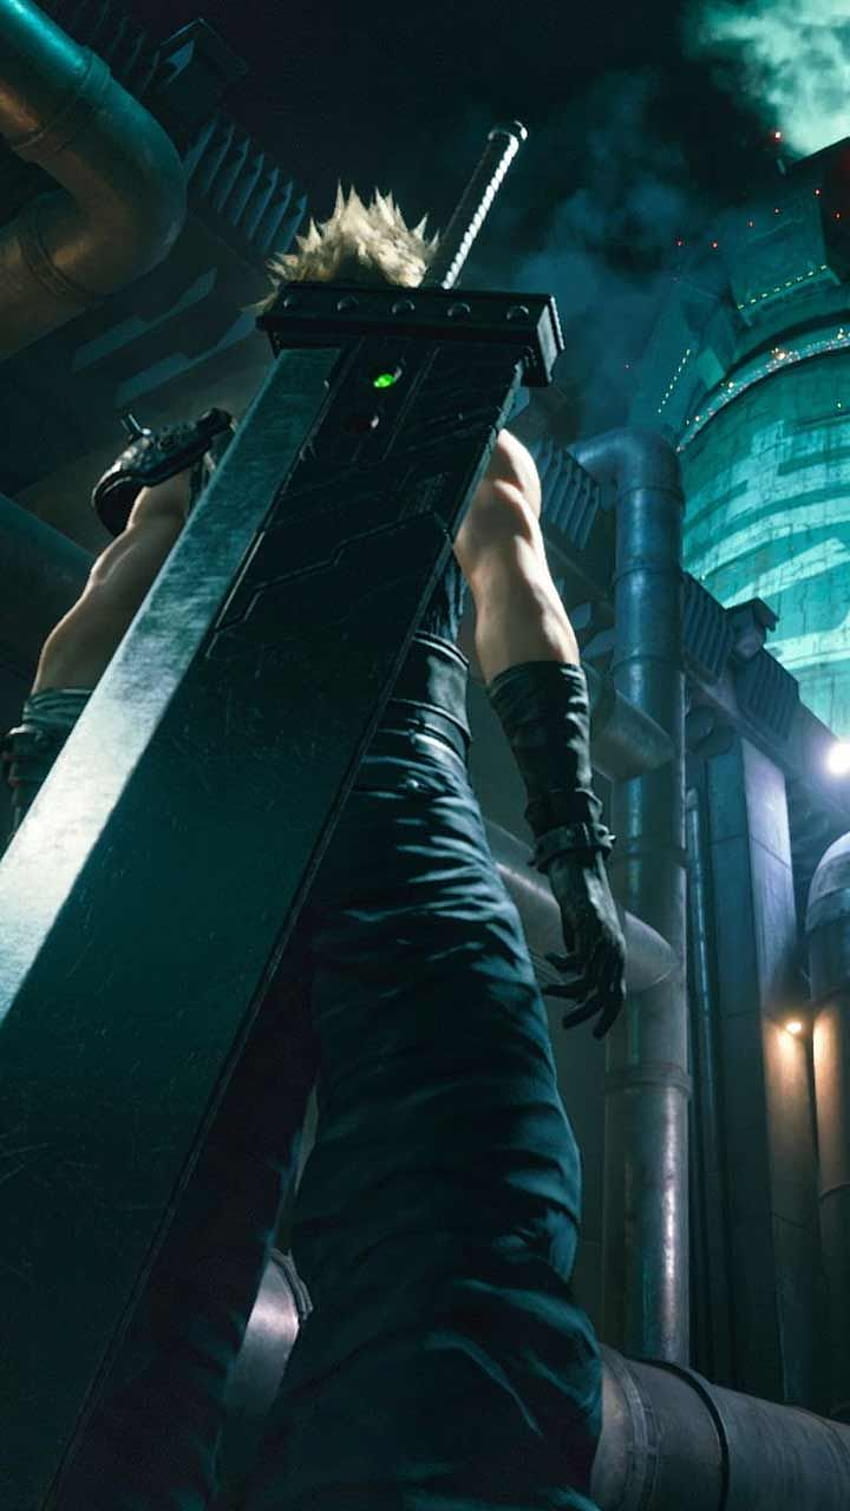 Pin on Game backgrounds, final fantasy 7 remake android HD phone wallpaper